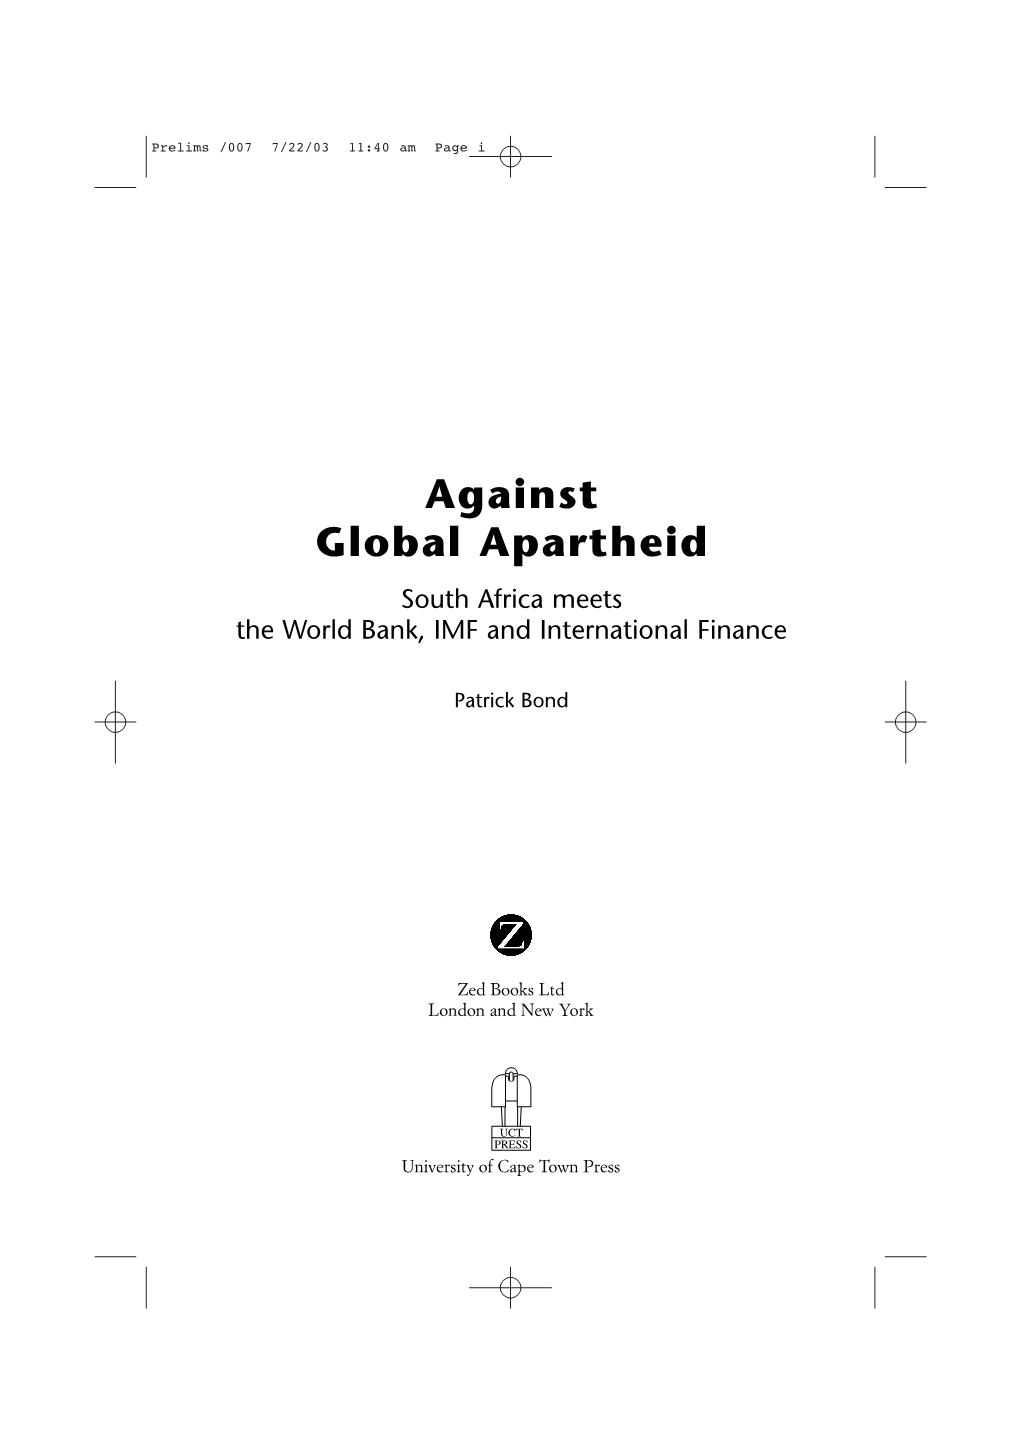 Against Global Apartheid South Africa Meets the World Bank, IMF and International Finance